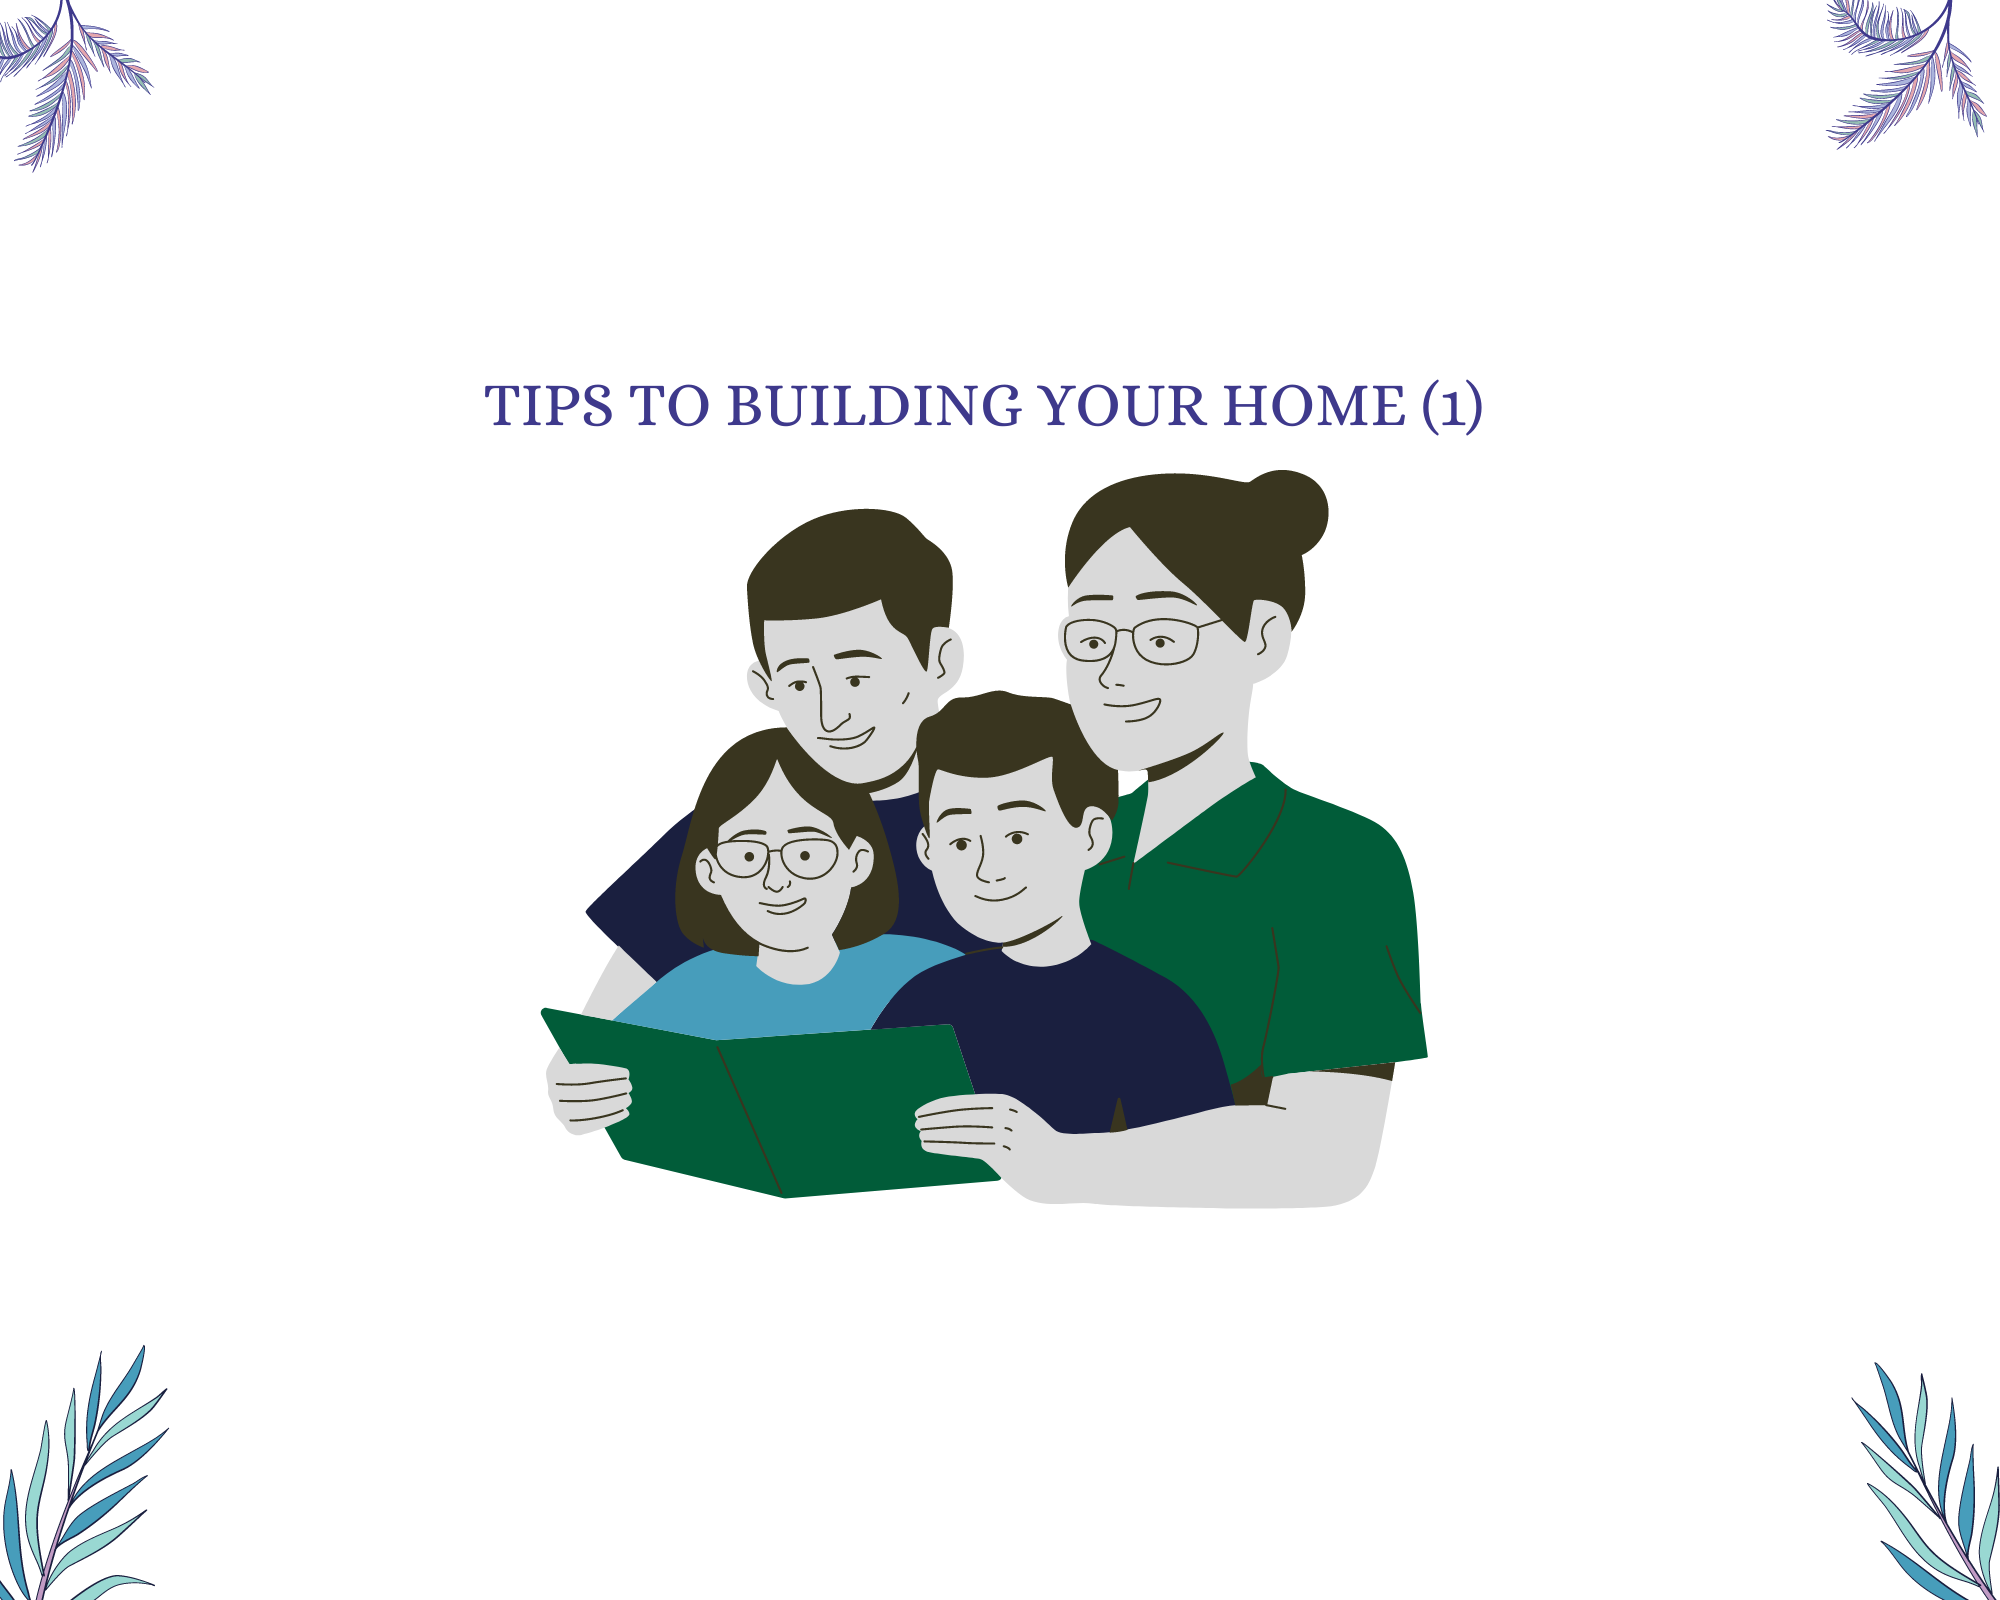 TIPS TO BUILDING YOUR HOME (1)